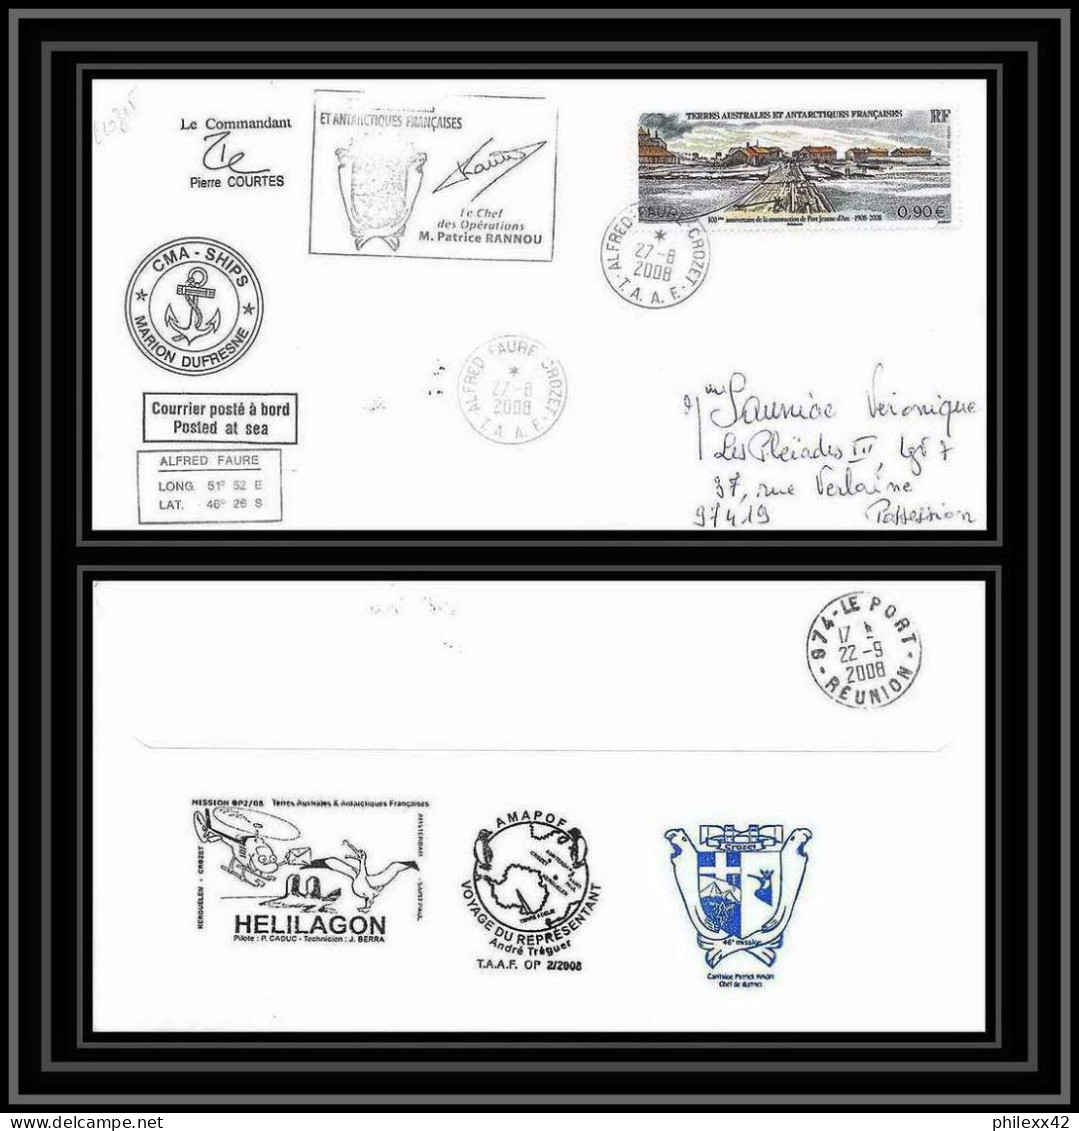 2825 ANTARCTIC Terres Australes TAAF Helilagon Lettre Cover Dufresne Signé Signed Op 2008/2 CROZET N°504 27/8/2008 - Helicopters